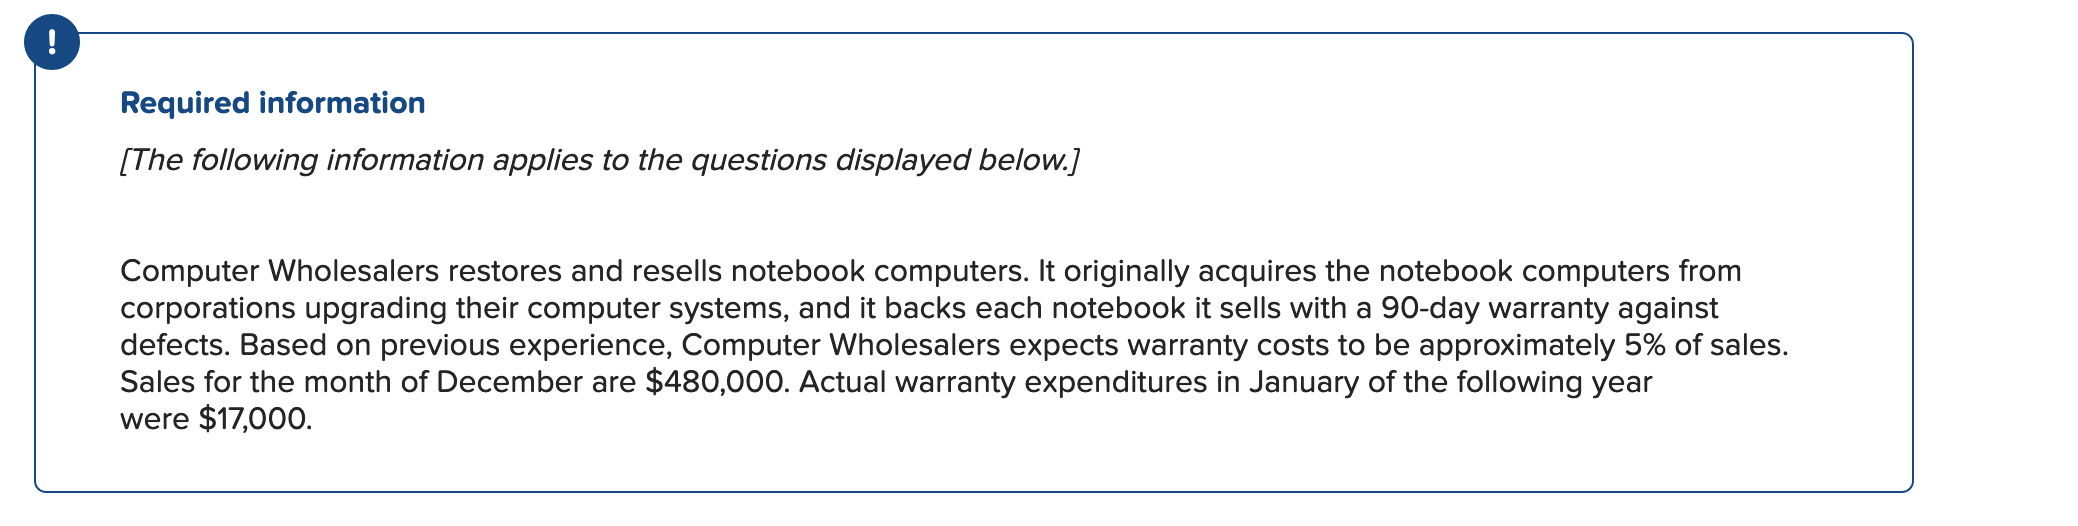 Required information
[The following information applies to the questions displayed below.]
Computer Wholesalers restores and resells notebook computers. It originally acquires the notebook computers from
corporations upgrading their computer systems, and it backs each notebook it sells with a 90-day warranty against
defects. Based on previous experience, Computer Wholesalers expects warranty costs to be approximately 5% of sales.
Sales for the month of December are $480,000. Actual warranty expenditures in January of the following year
were $17,000.
